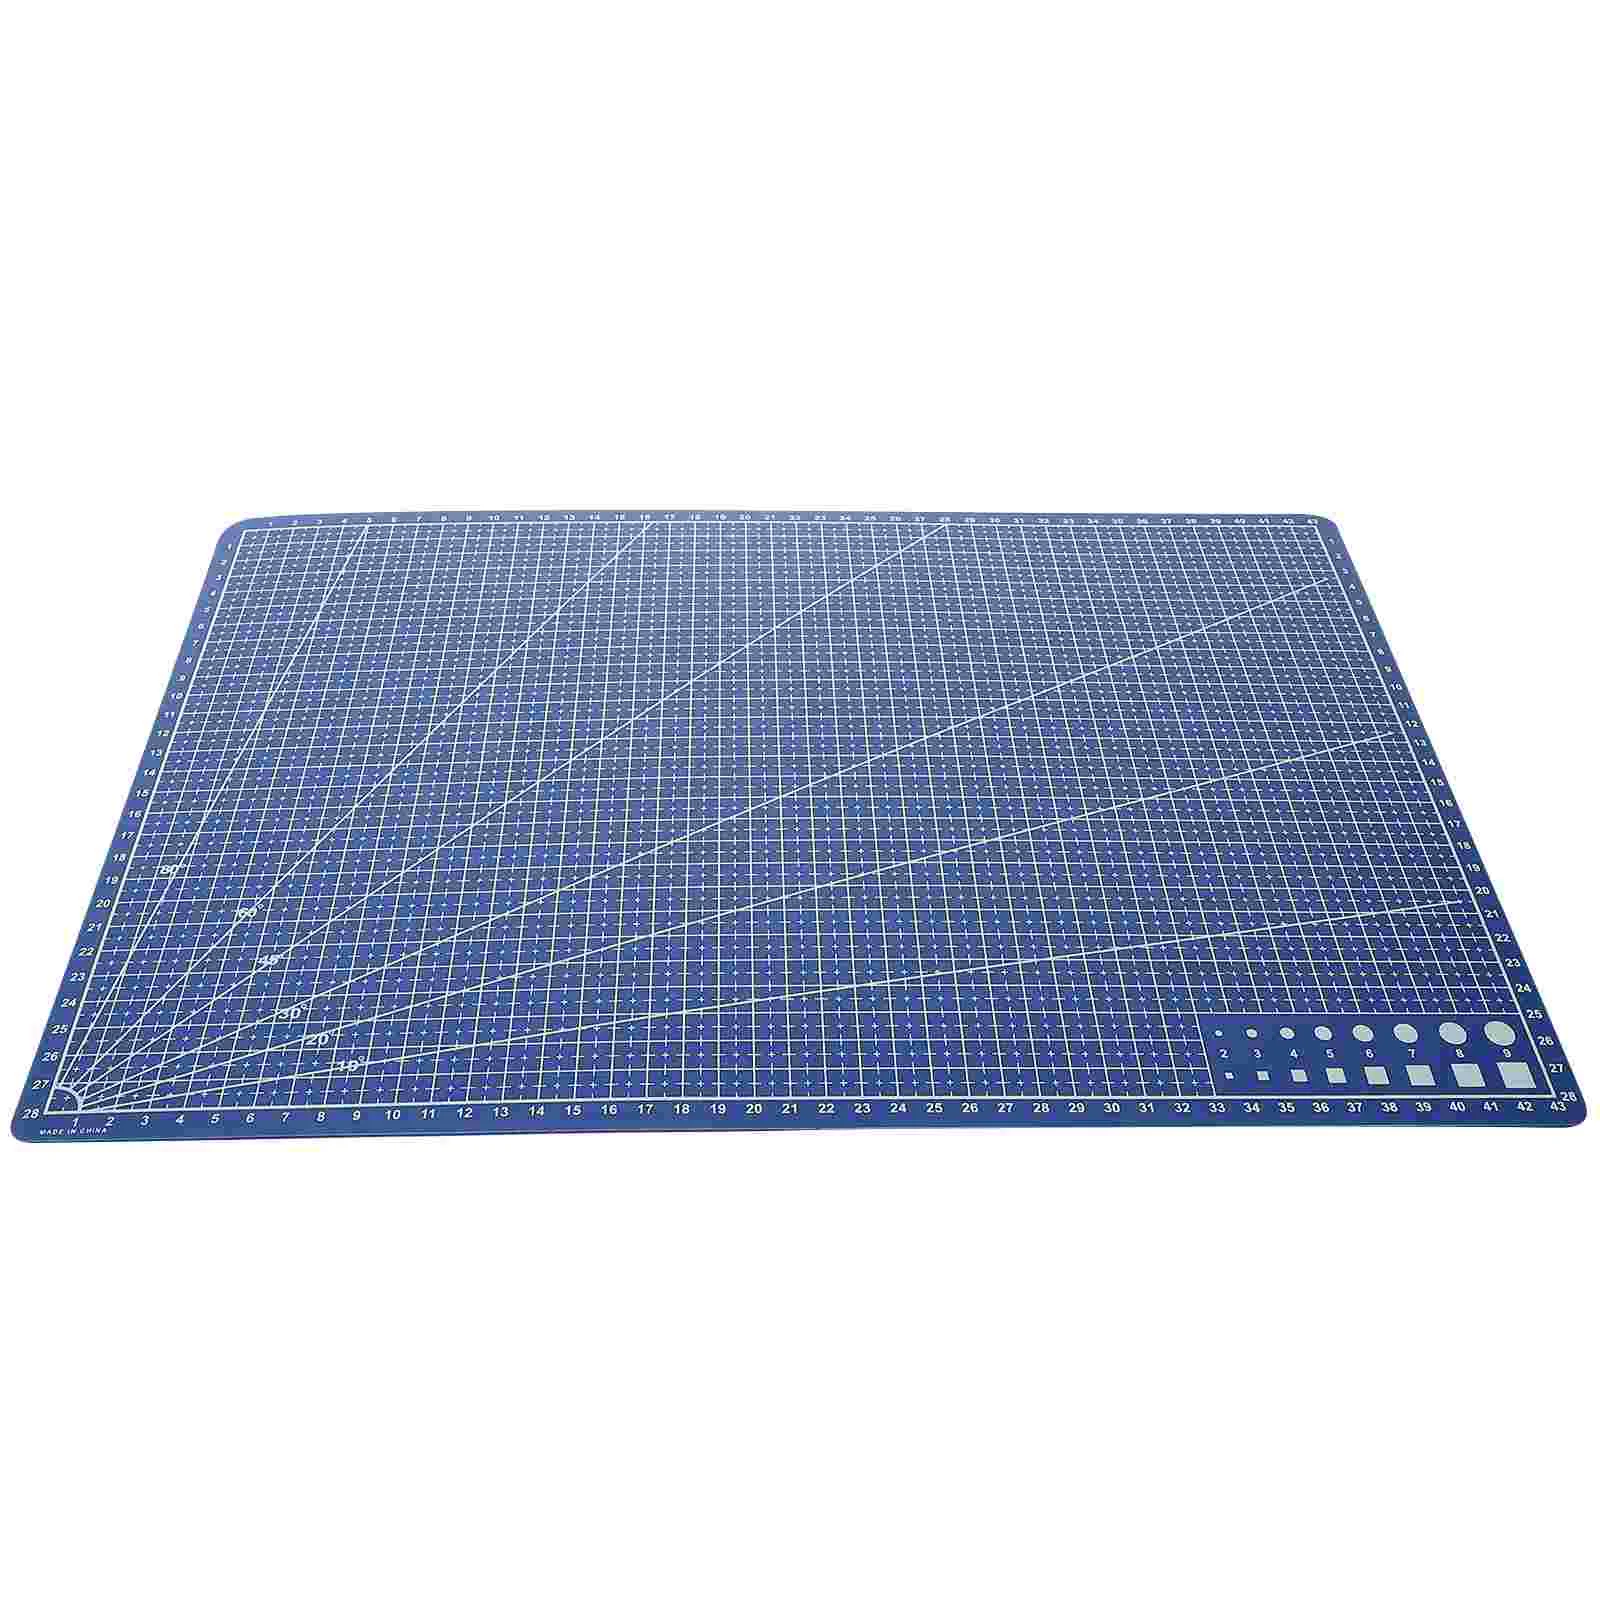 

Cutting Mat Mats Board Rotary Self Engraving Sewing Sided Craft Double X Professional Scrapbooking Quilting Pvc Crafts Pad Pp